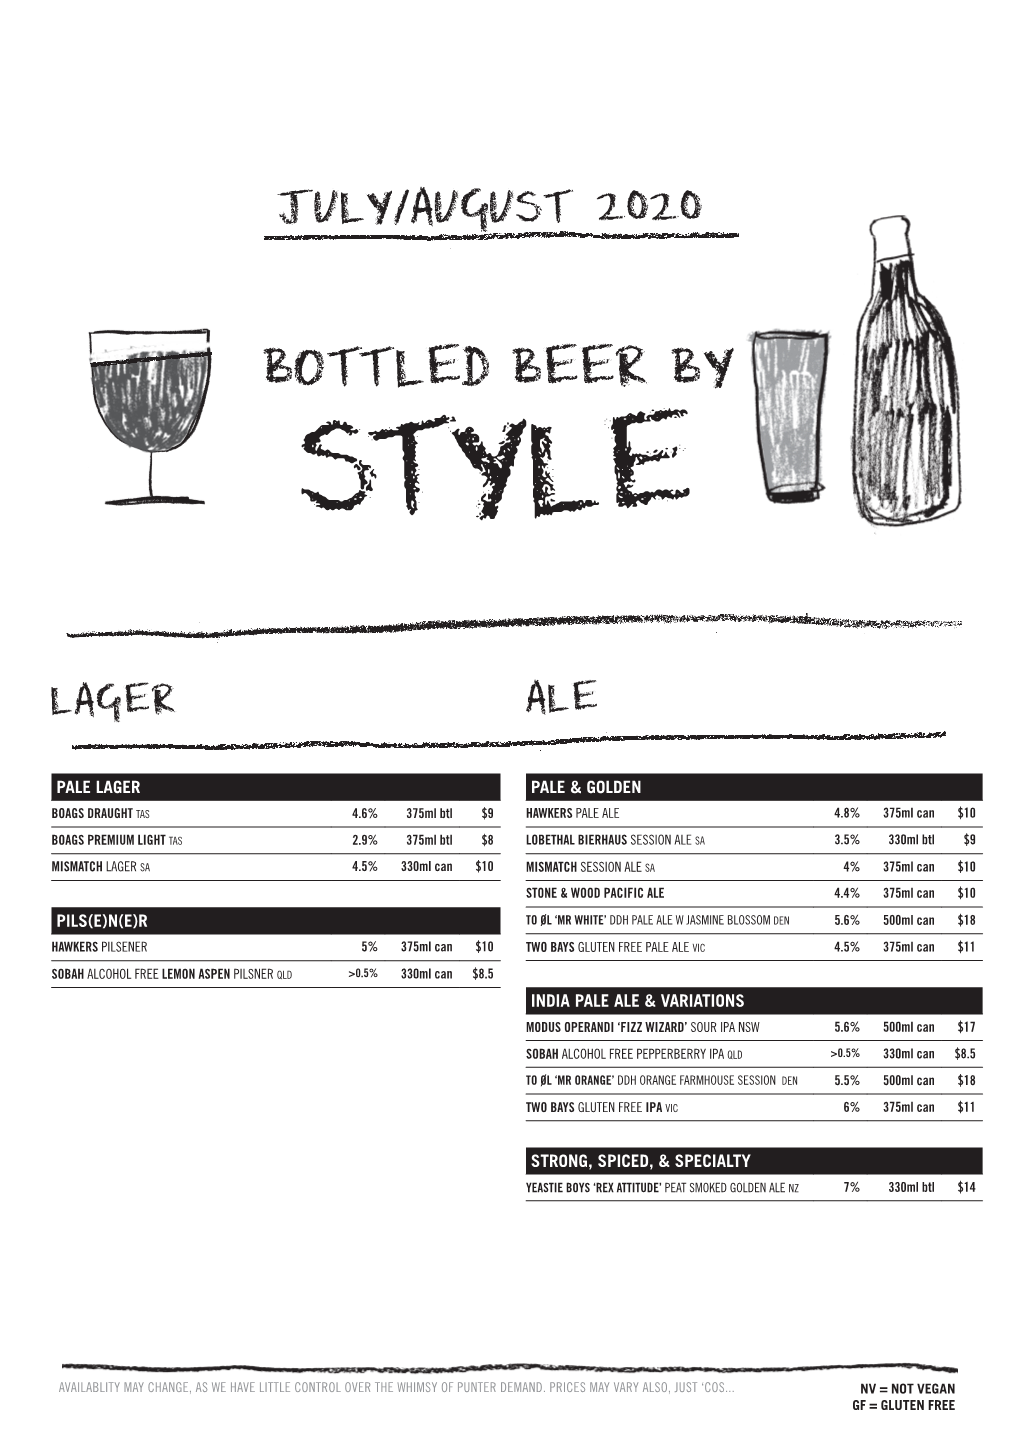 Bottled Beer by Style